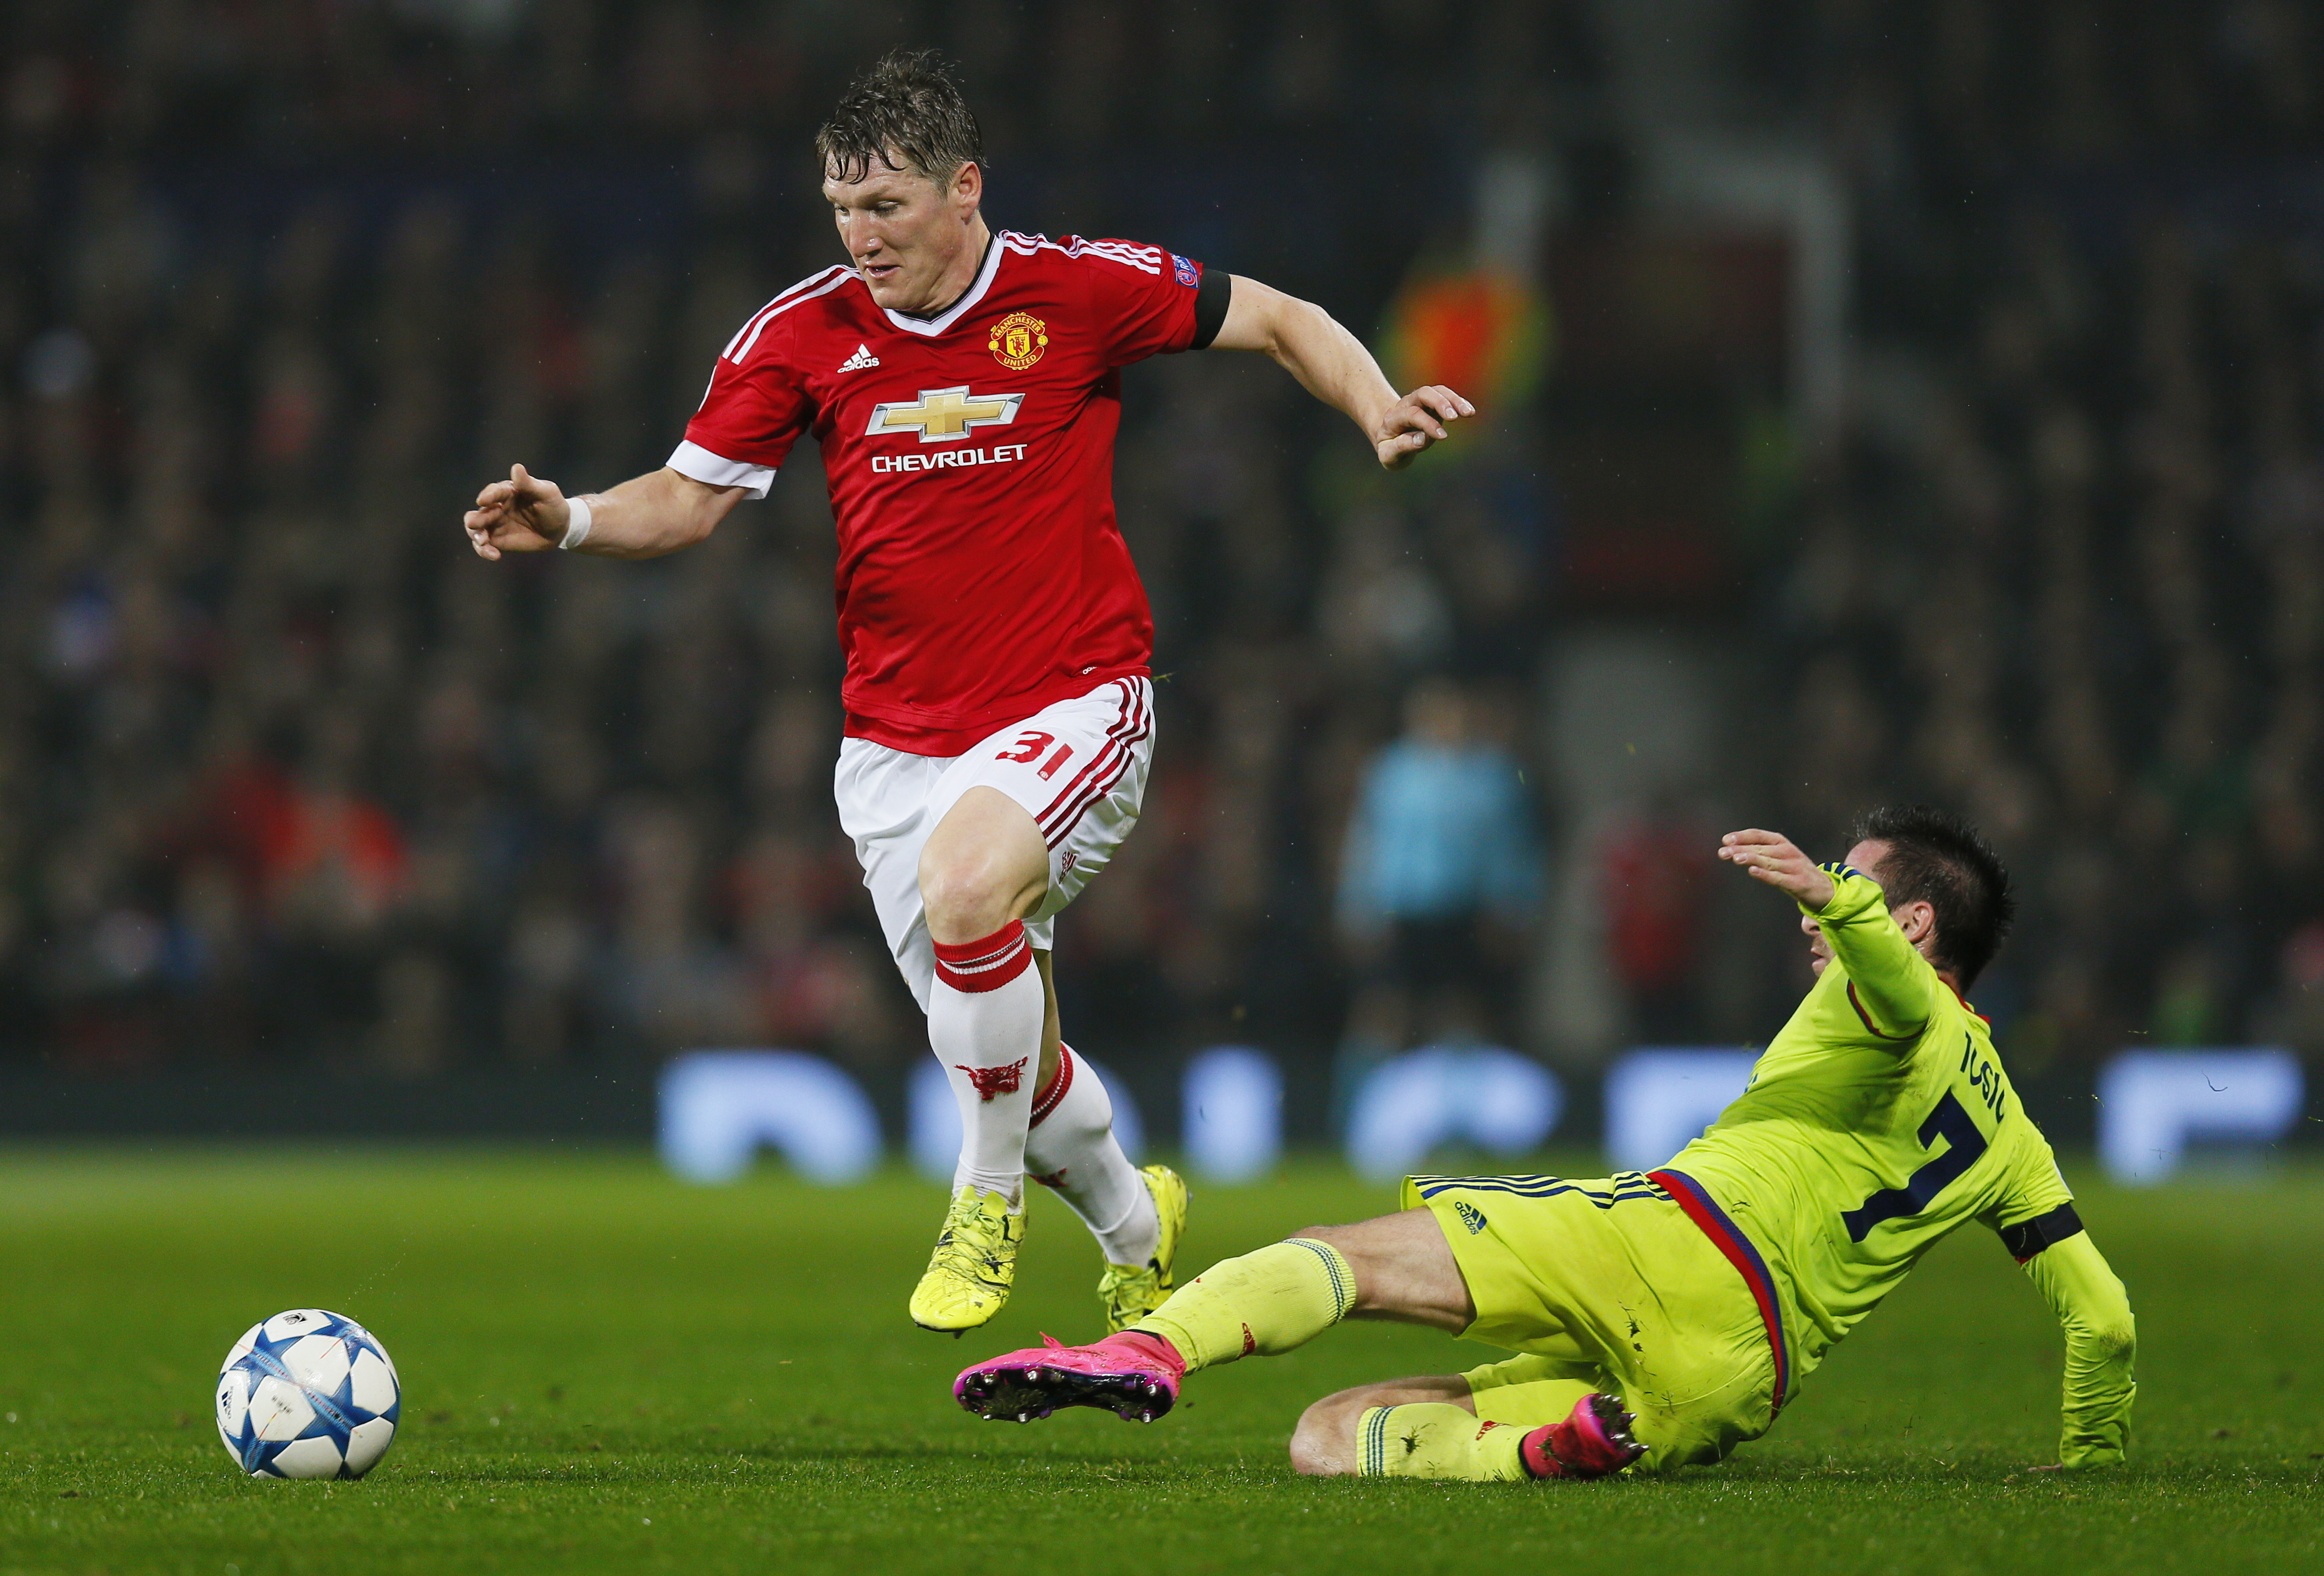 Manchester United's Bastian Schweinsteiger and CSKA Moscow's Zoran Tosic in action during UEFA Champions League game at Old Trafford on March 11, 2015. Photo: Reuters